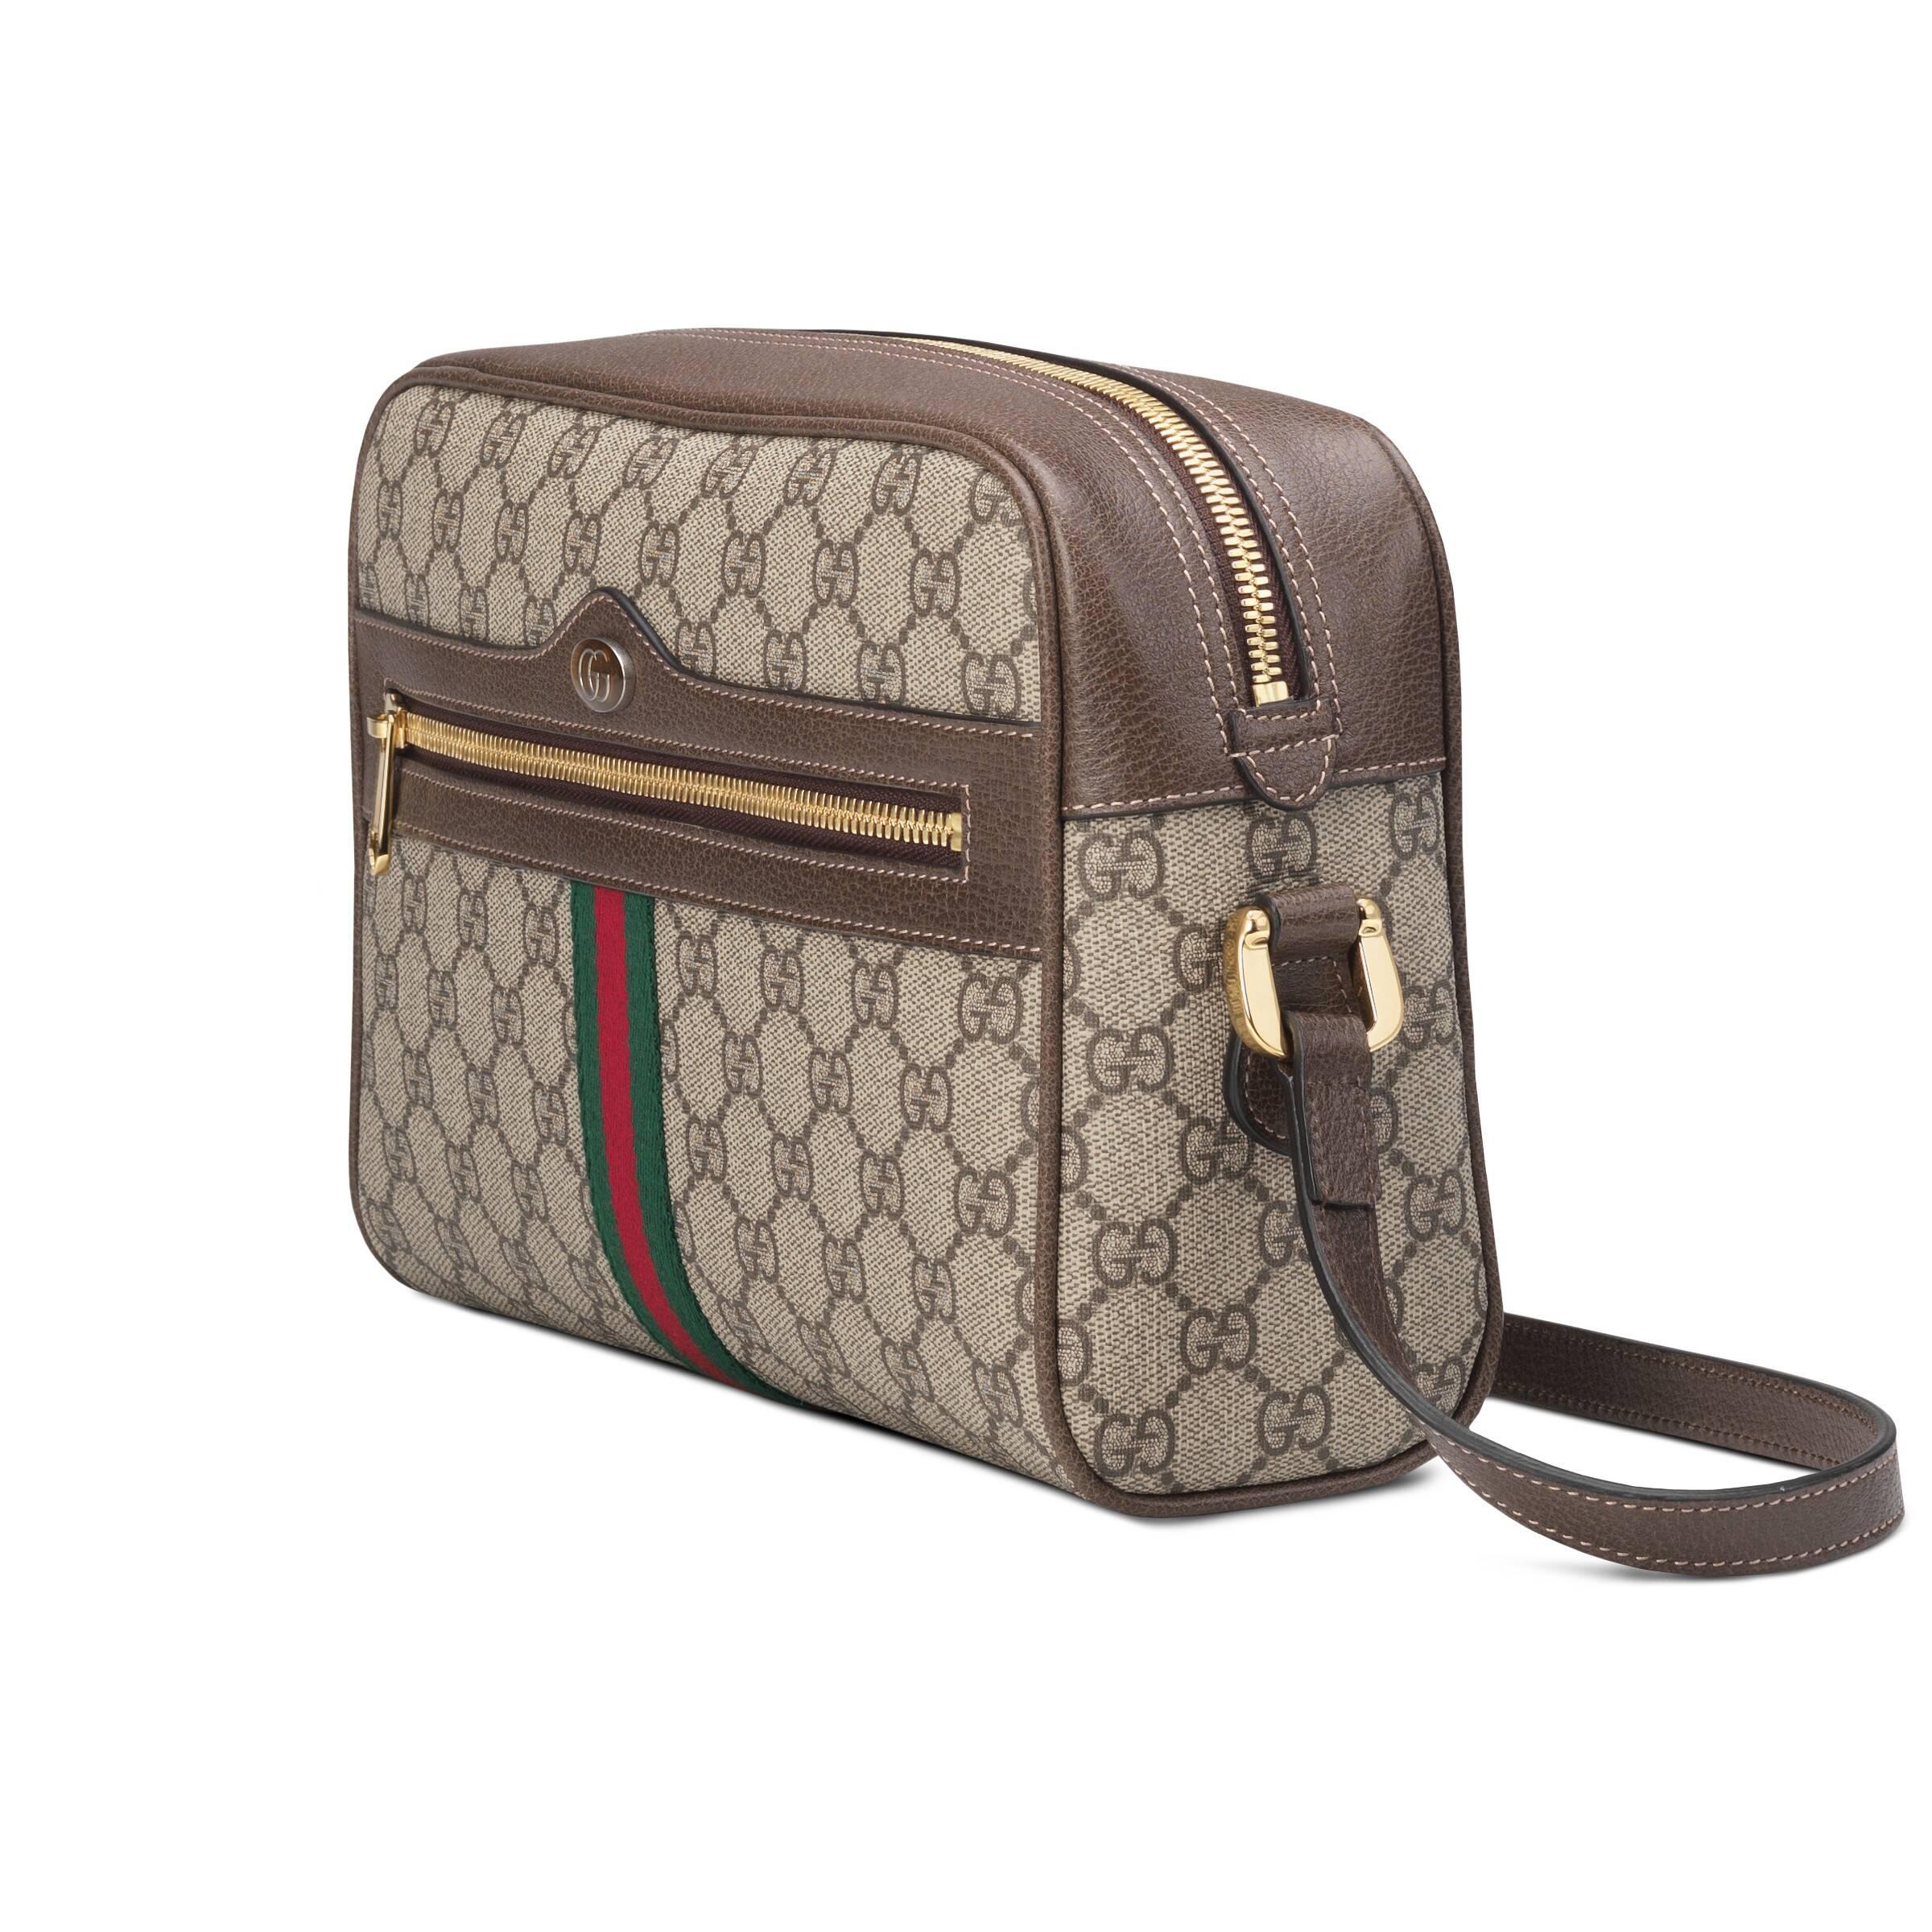 Gucci Synthetic Ophidia GG Supreme Small Shoulder Bag in Beige (Natural